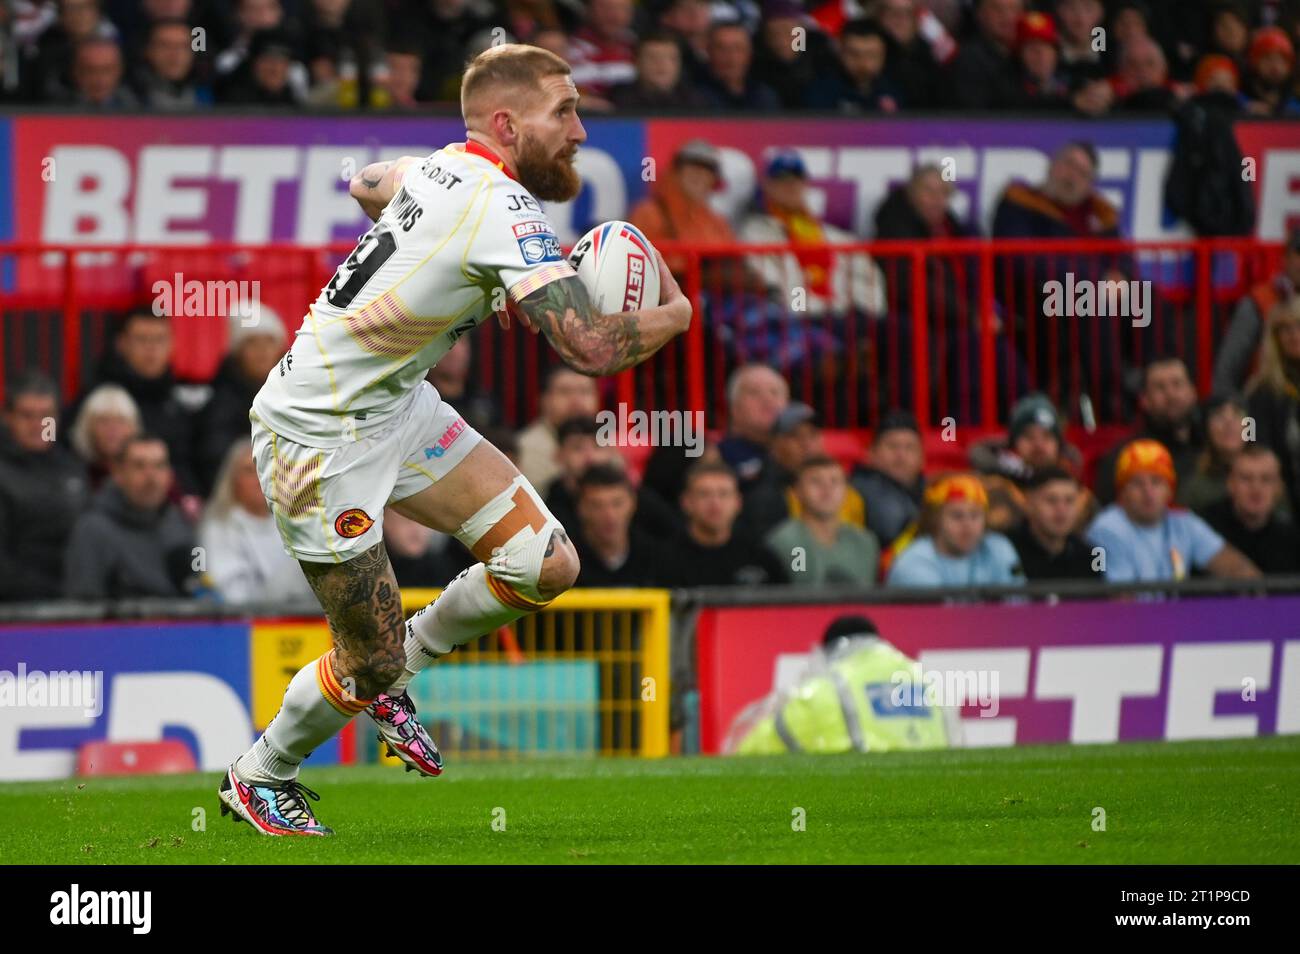 Sam Tomkins #29 of Catalans Dragons during the Betfred Super League Grand Final match Wigan Warriors vs Catalans Dragons at Old Trafford, Manchester, United Kingdom, 14th October 2023 (Photo by Craig Cresswell/News Images) Stock Photo